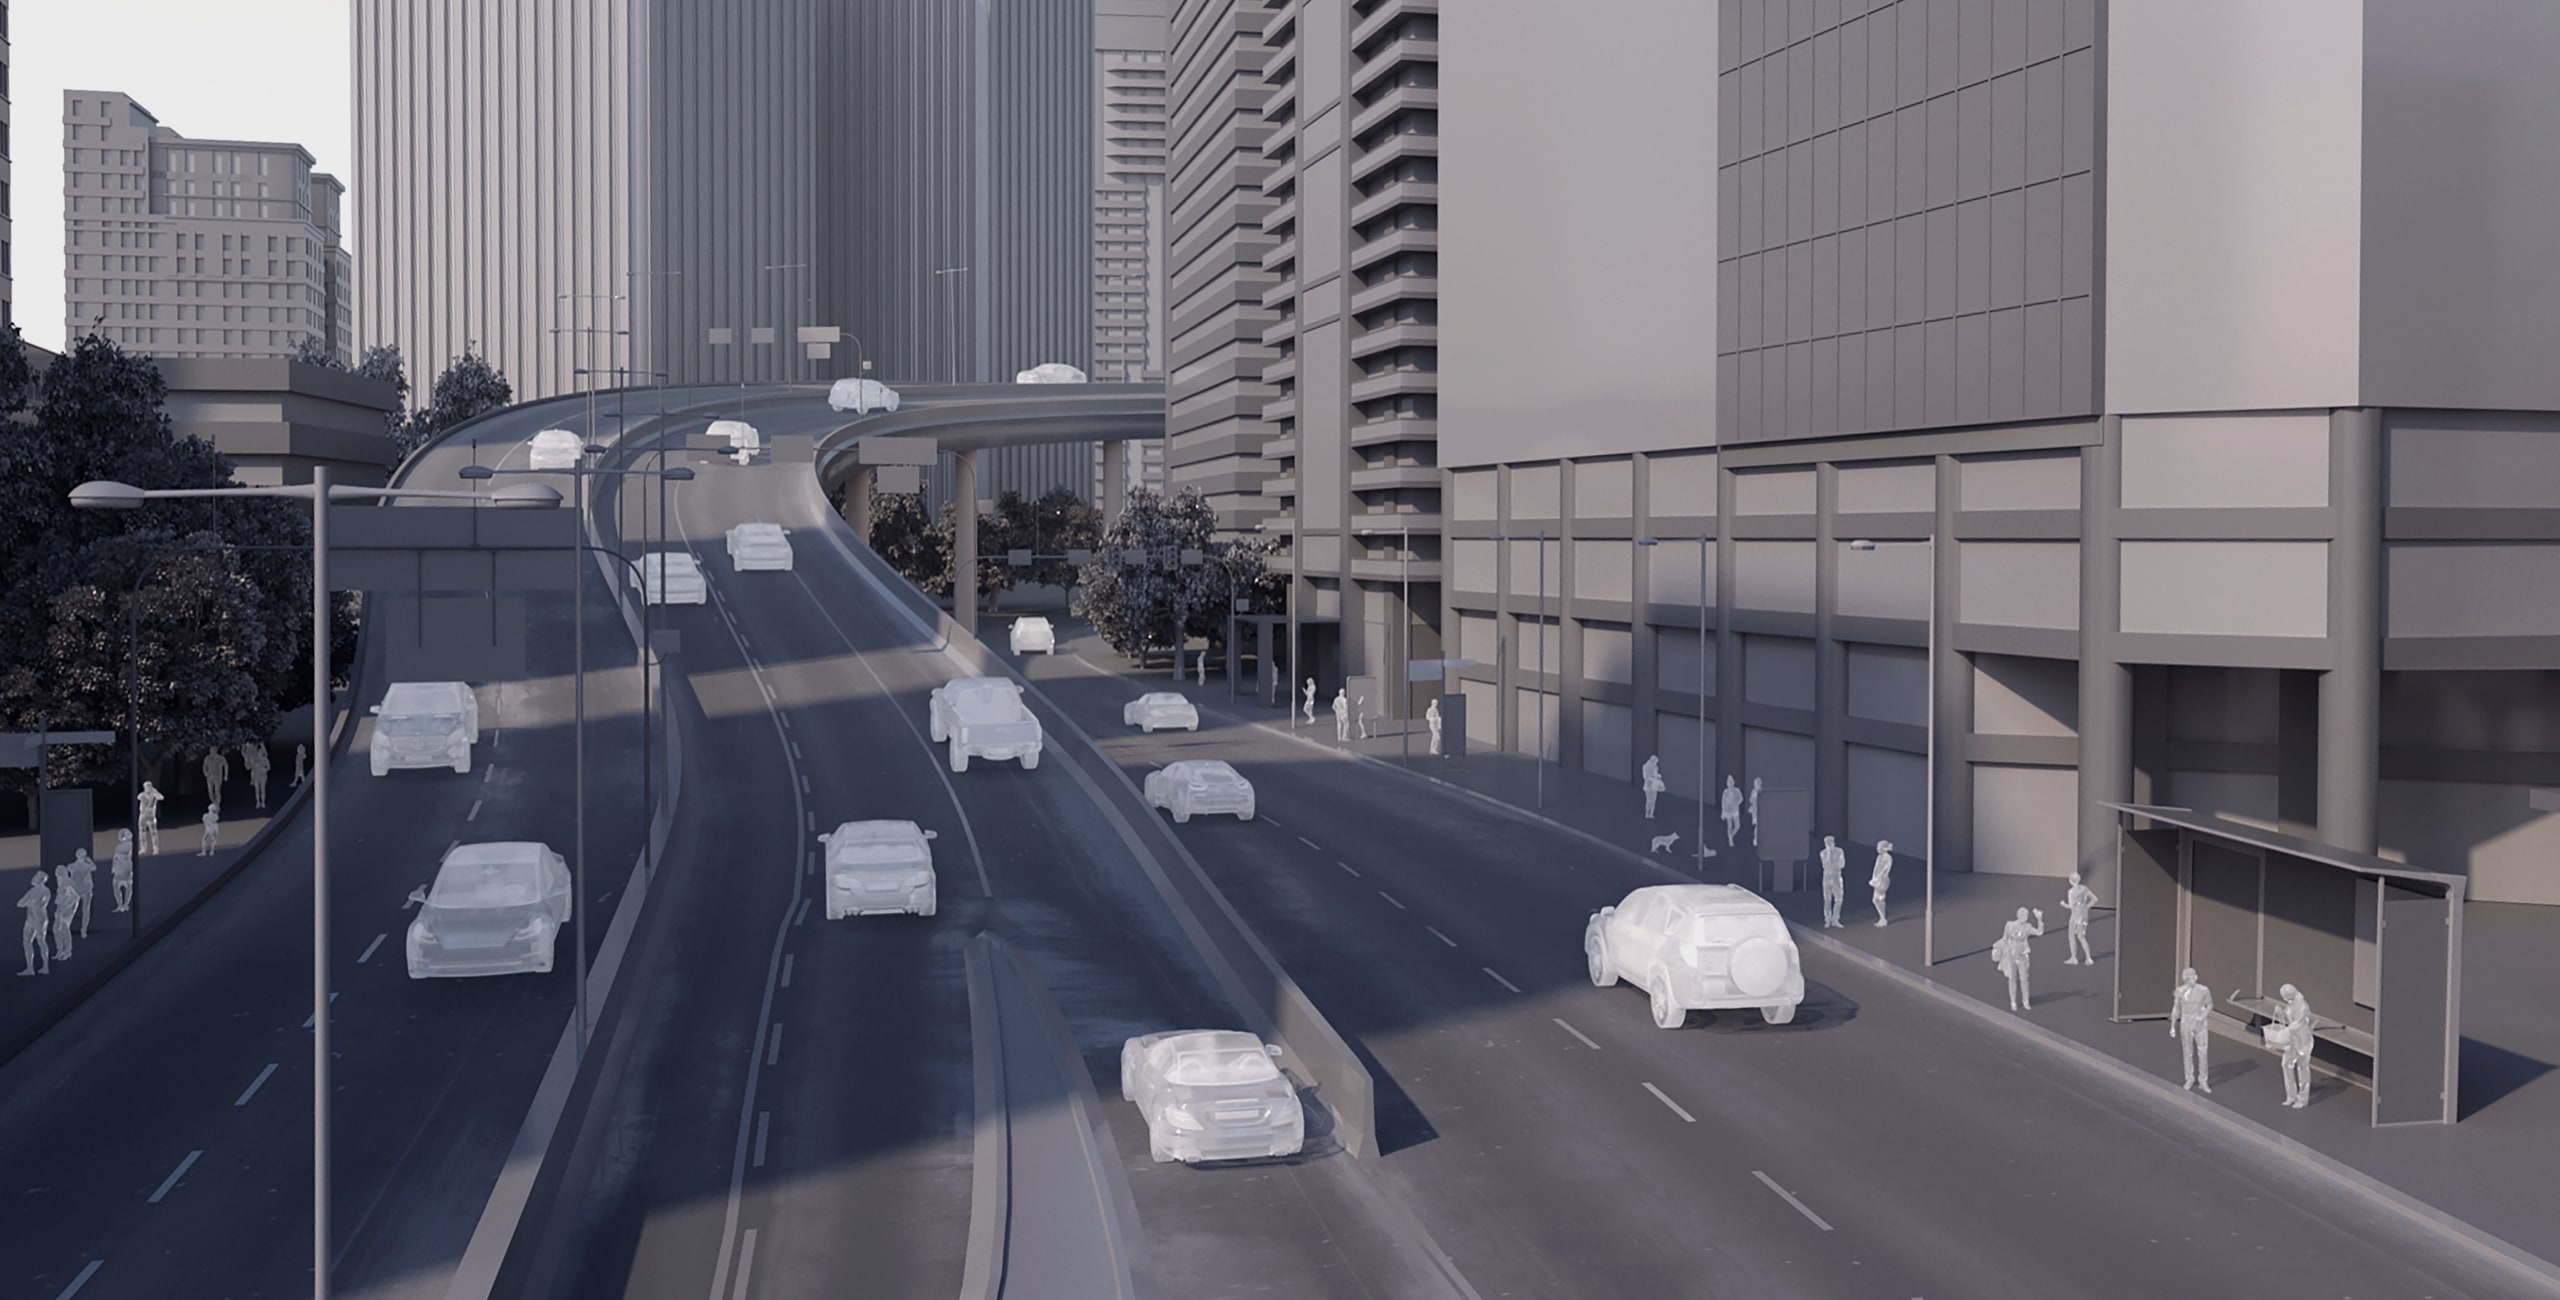 A 3d rendering of a city street with cars driving on it.